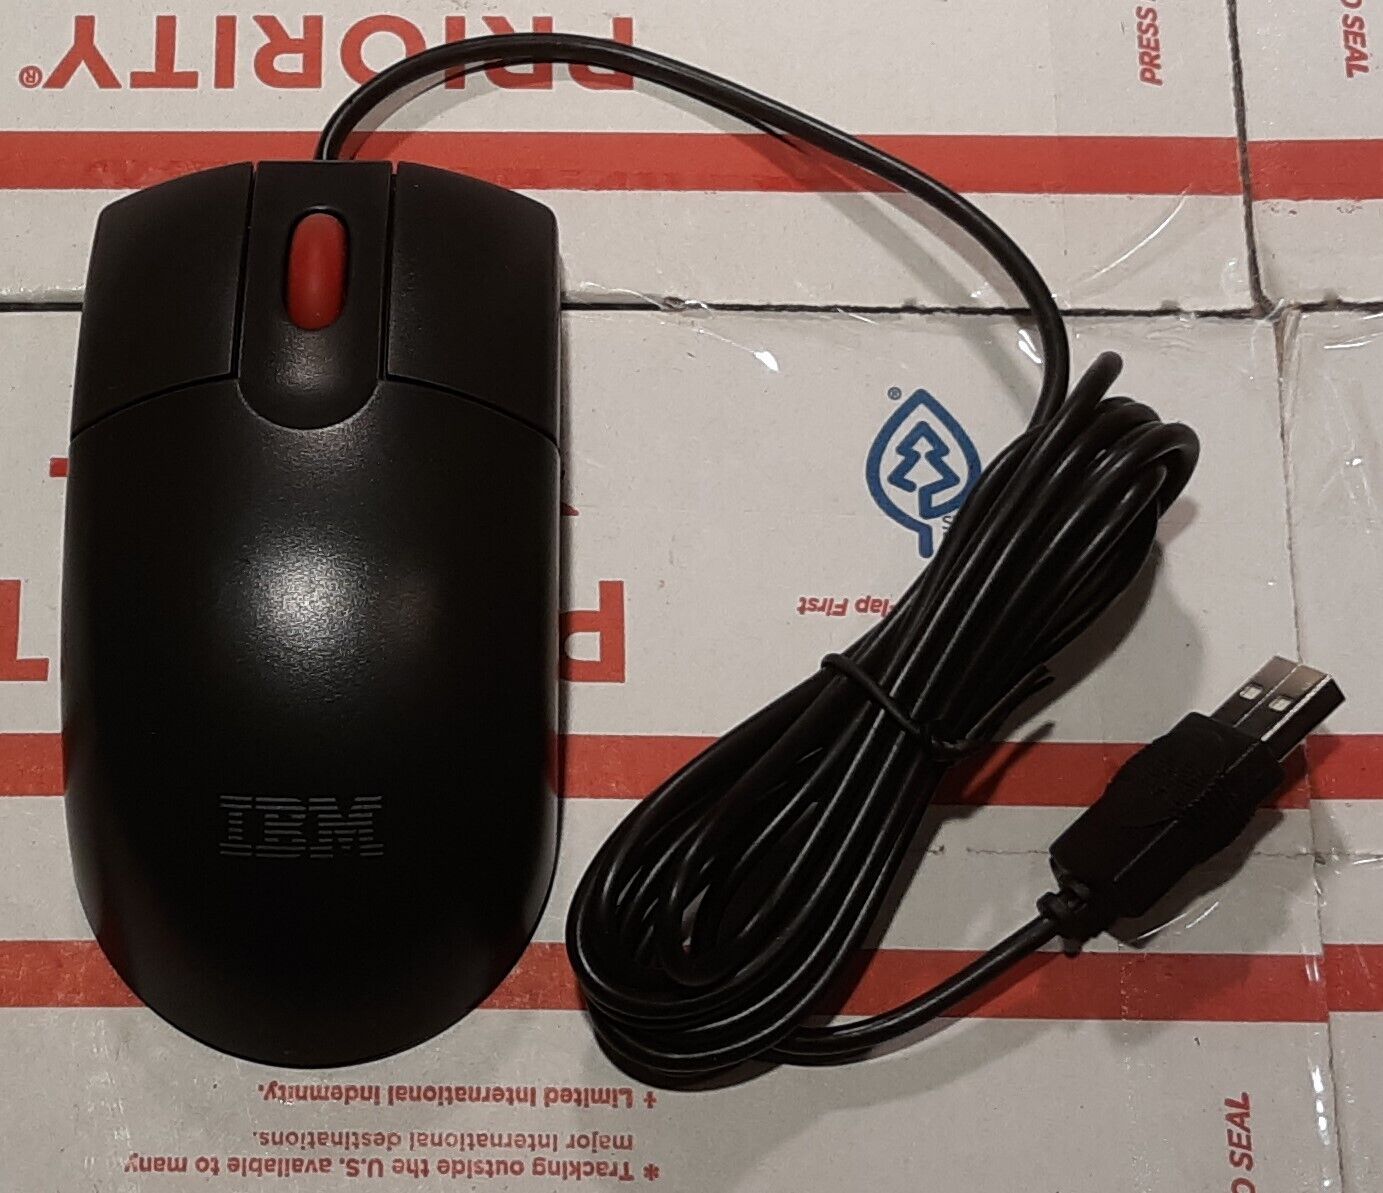 New, Vintage iBM #MO28UO 3 Button USB Optical Wheel Mouse. Tested.